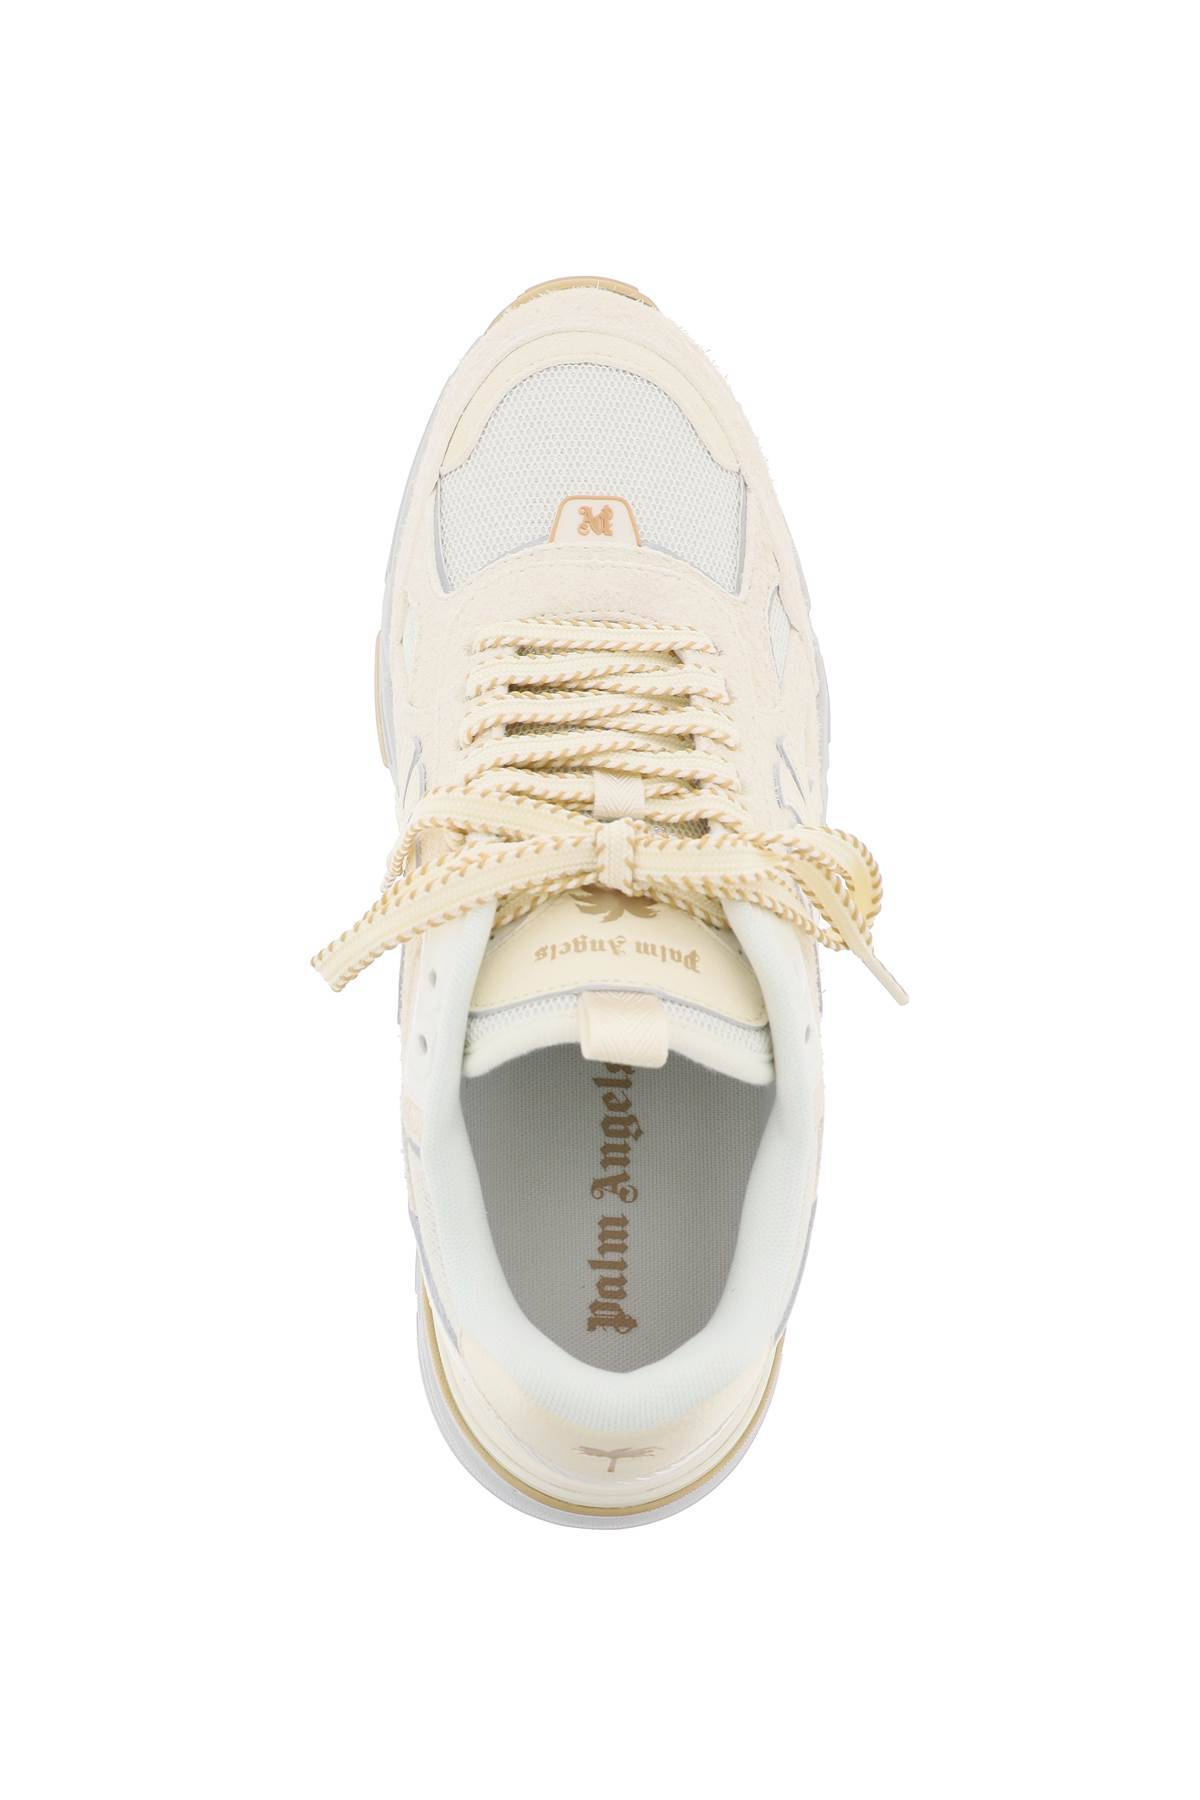 Shop Palm Angels Palm Runner Sneakers For In Beige,white